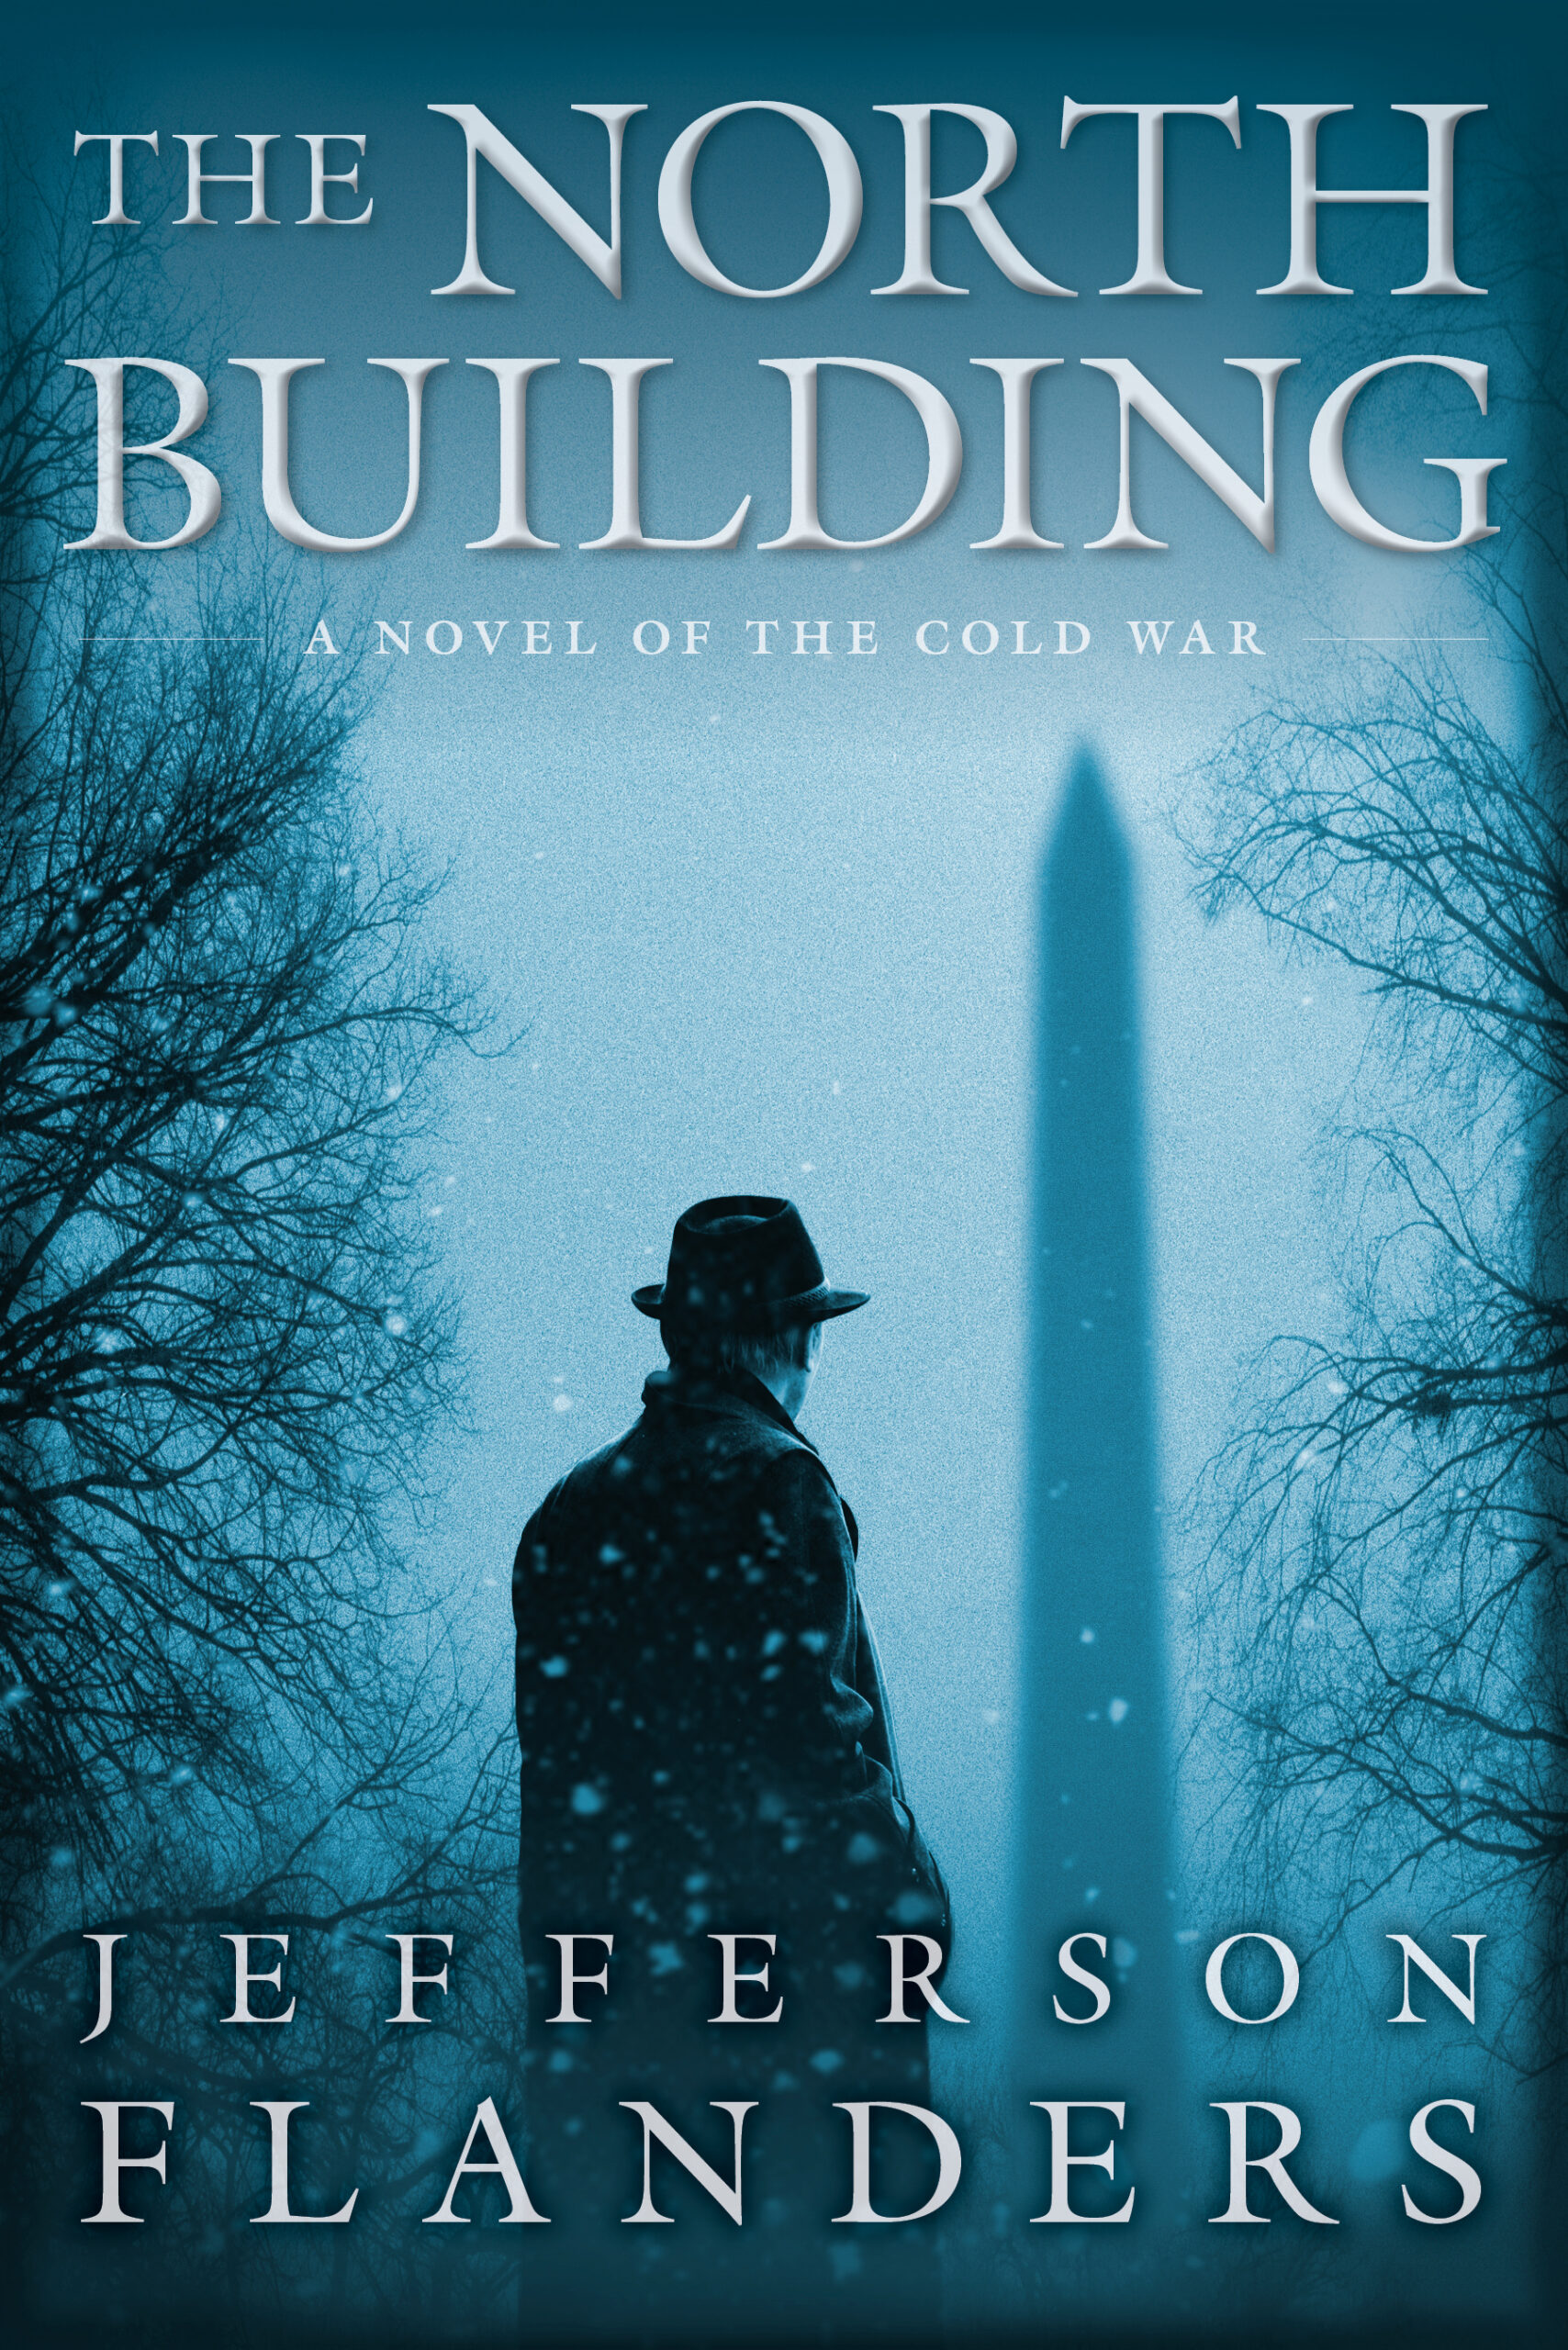 The North Building, a novel by Jefferson Flanders